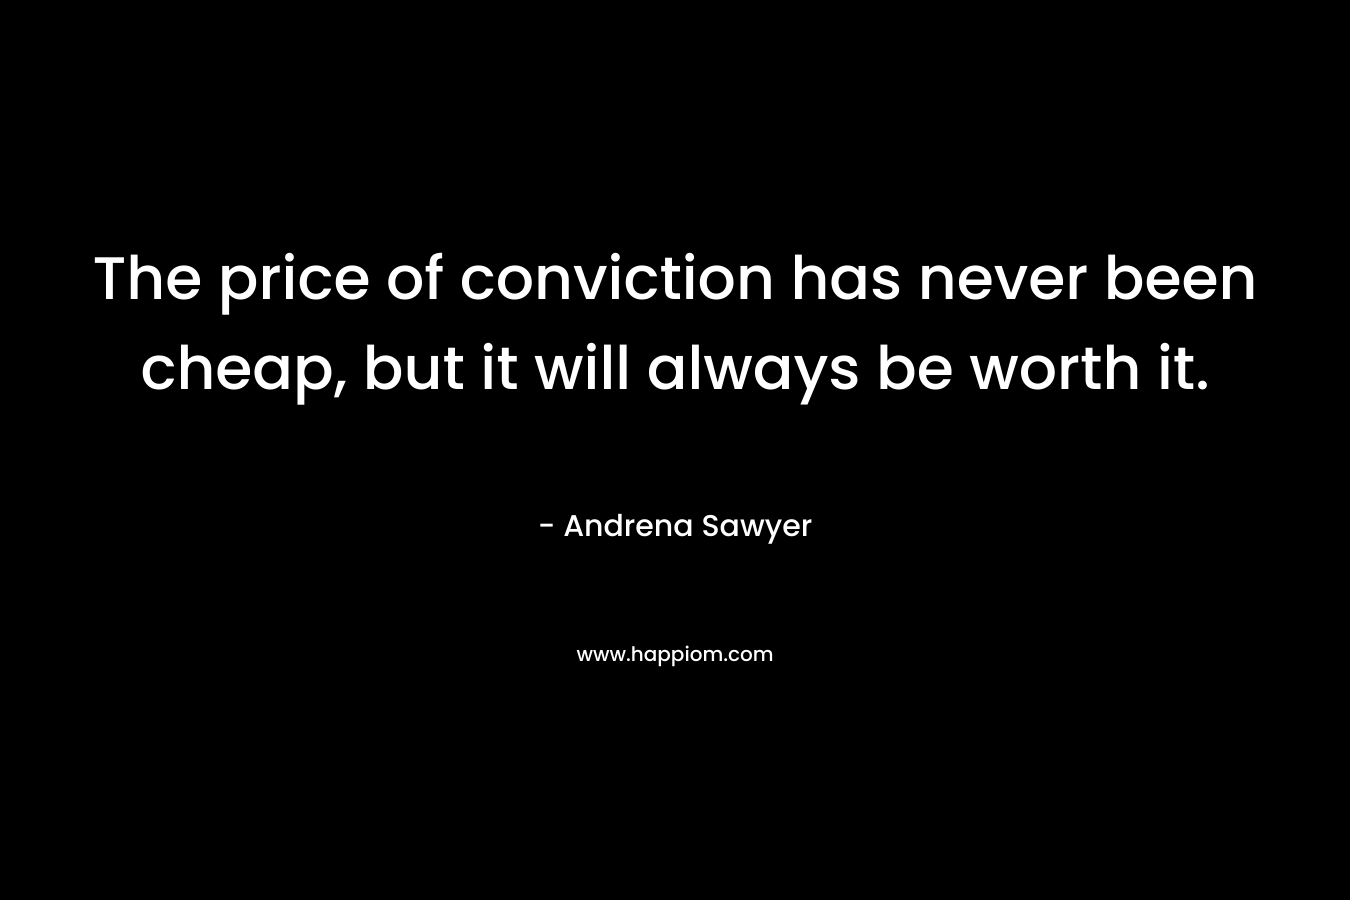 The price of conviction has never been cheap, but it will always be worth it.